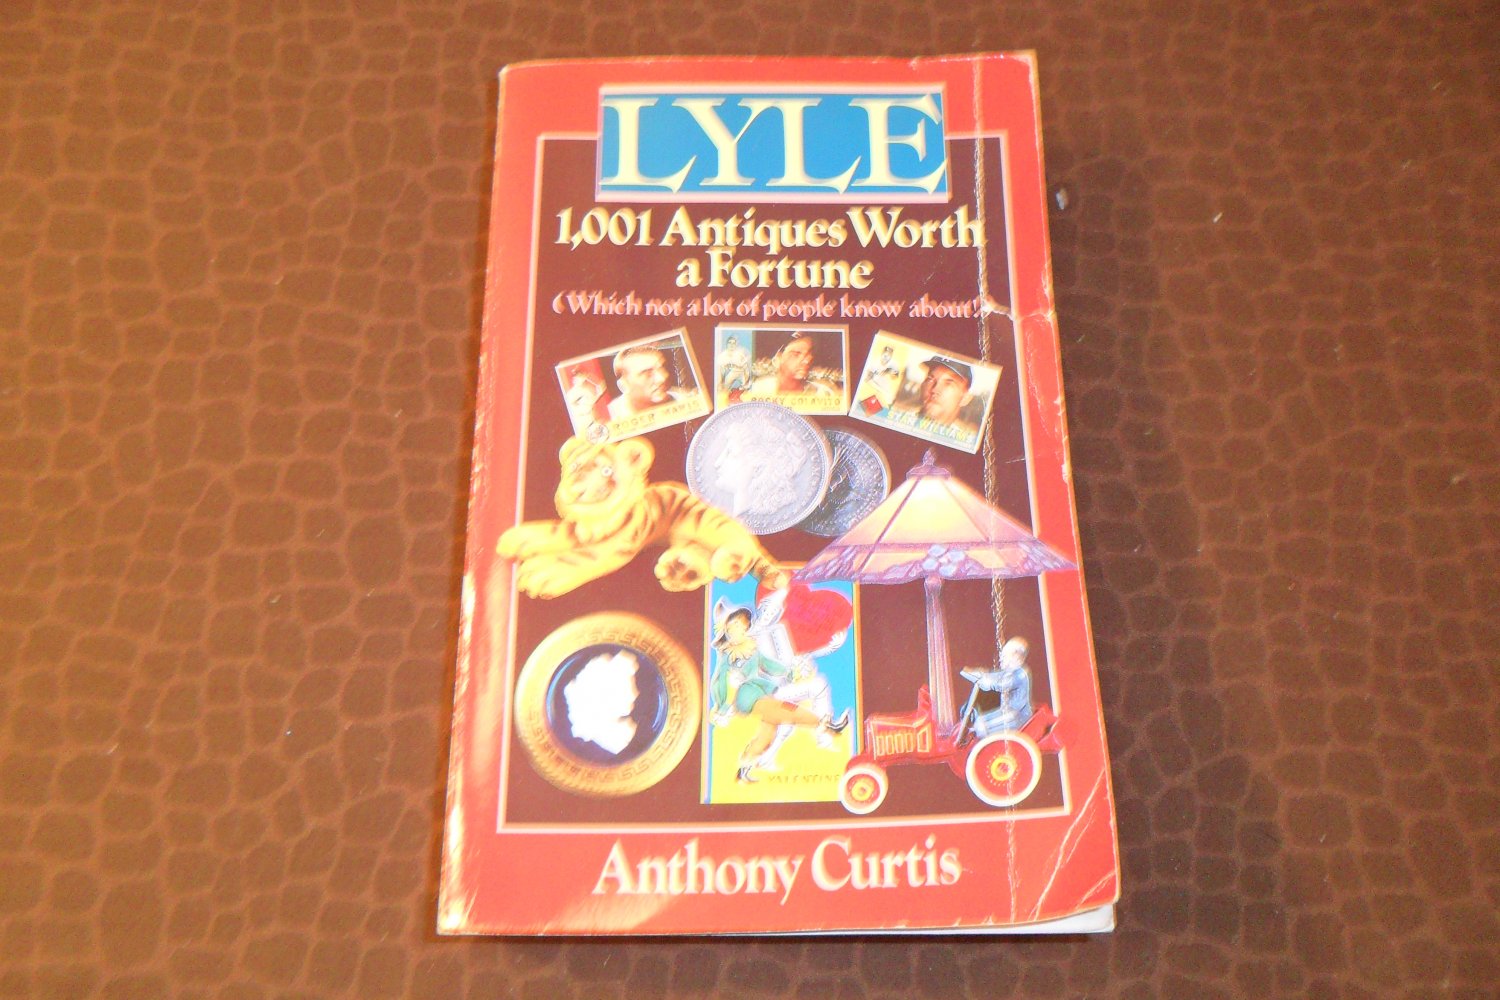 1992 LYLE 1,001 Antiques Worth A Fortune Book Anthony Curtis